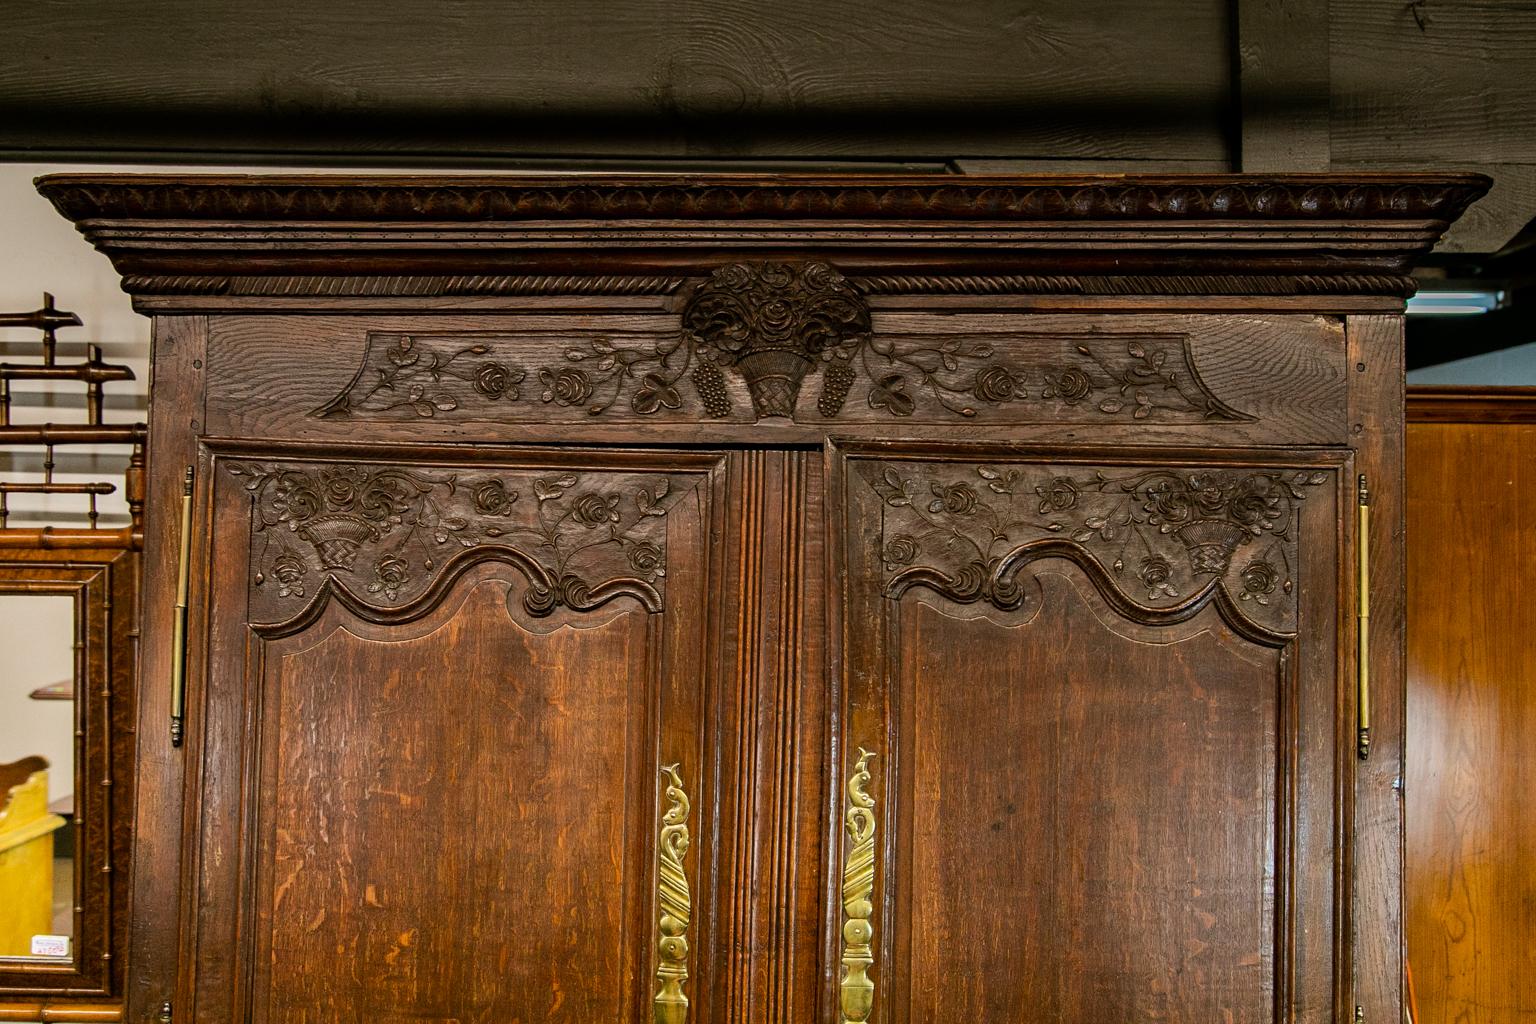 18th century carved Oak French armoire has the original brass escutcheons and hinges. The cornice is carved with interlaced acanthus leaves and gadrooned molding. The frieze has a carved basket of flowers and grapes. The doors are carved with